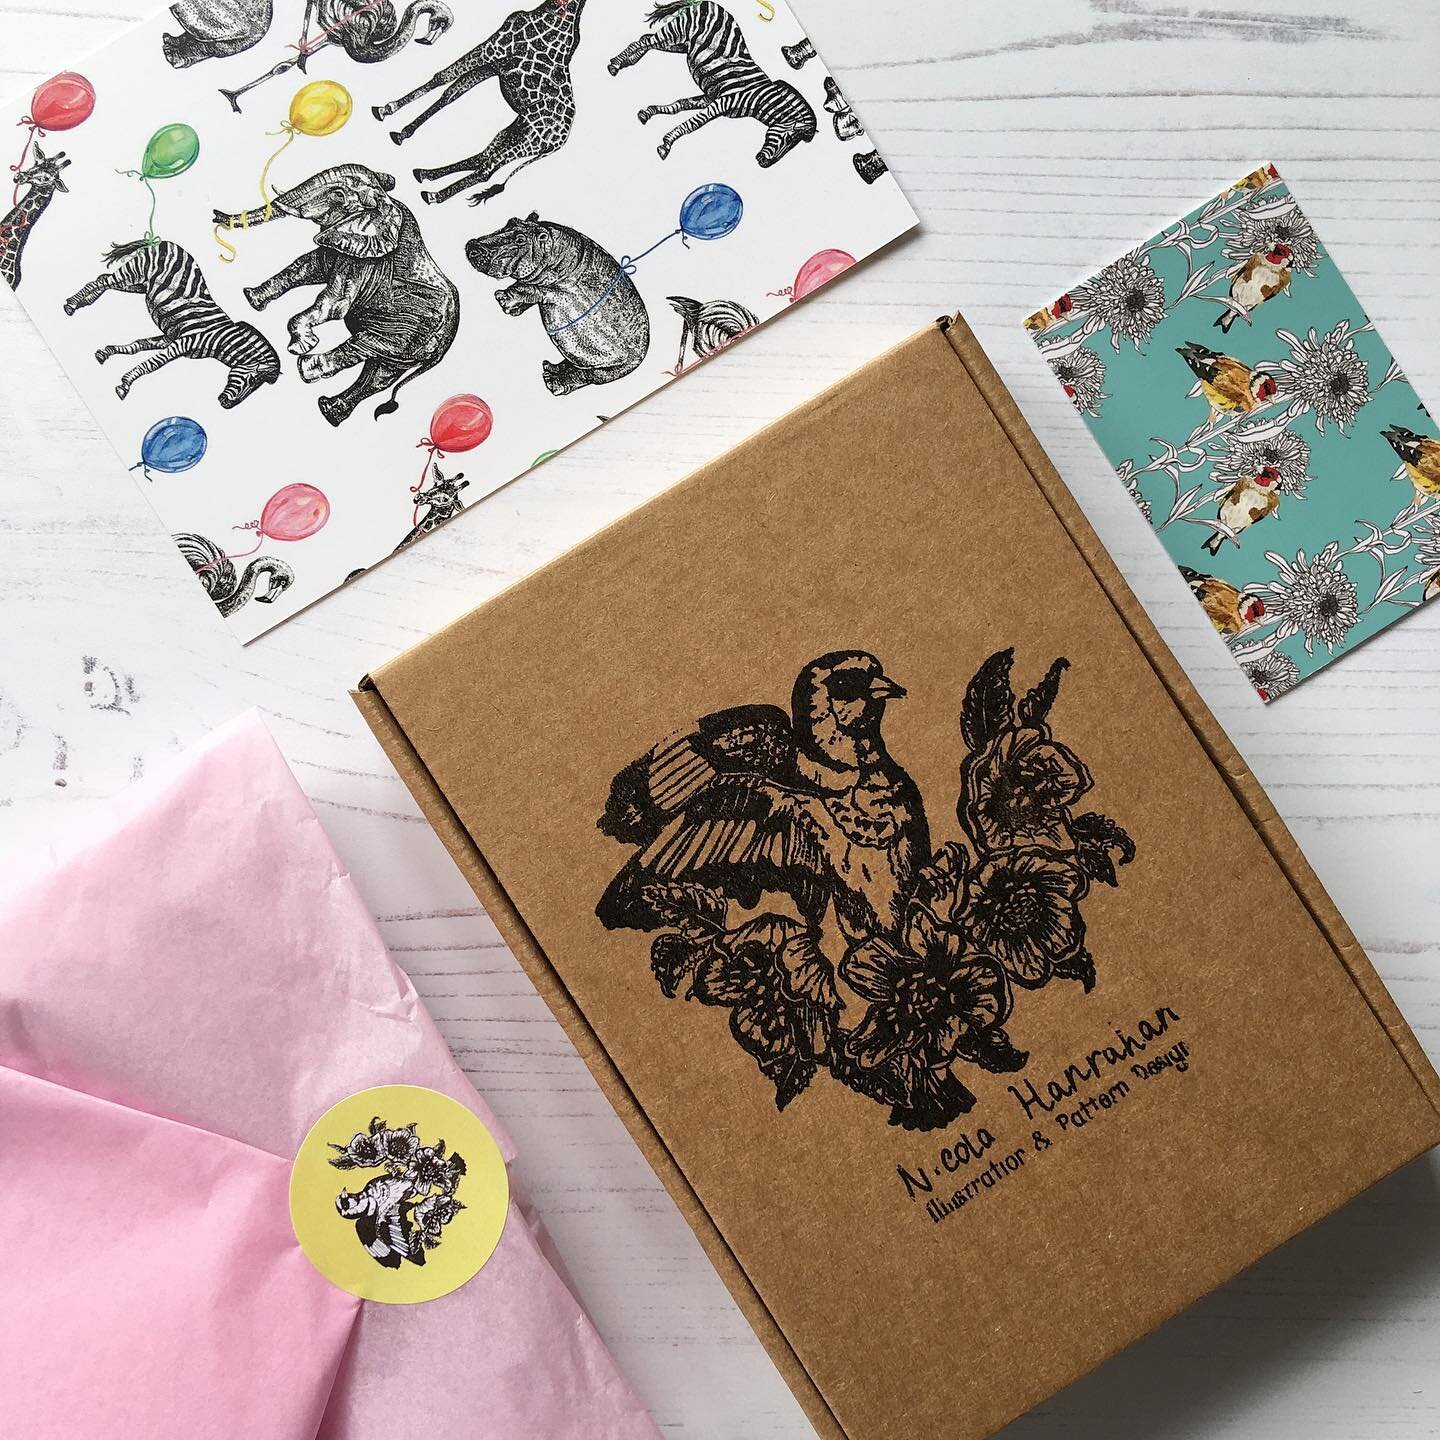 I&rsquo;m loving being able to wrap up orders now my shop is open again! Wrapping things in tissue paper and writing a note on one of my Balloon Animal postcards is so enjoyable. I&rsquo;m also including a free patterned notebook with every @etsyuk o